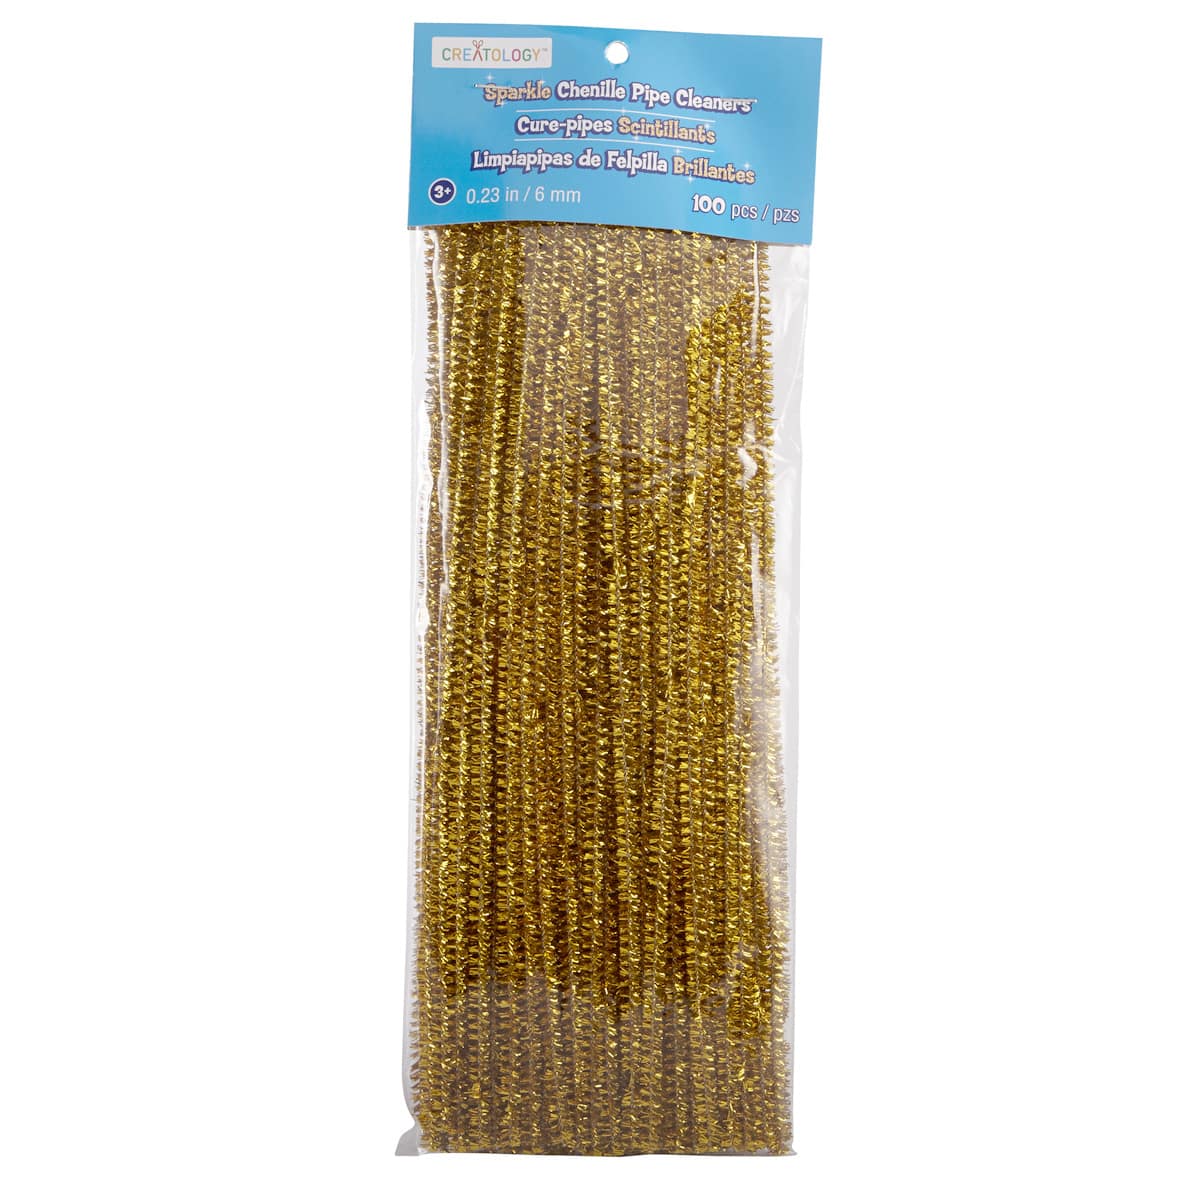 12 Packs: 100 ct. (1,200 total) Gold Glitter Chenille Pipe Cleaners by  Creatology™